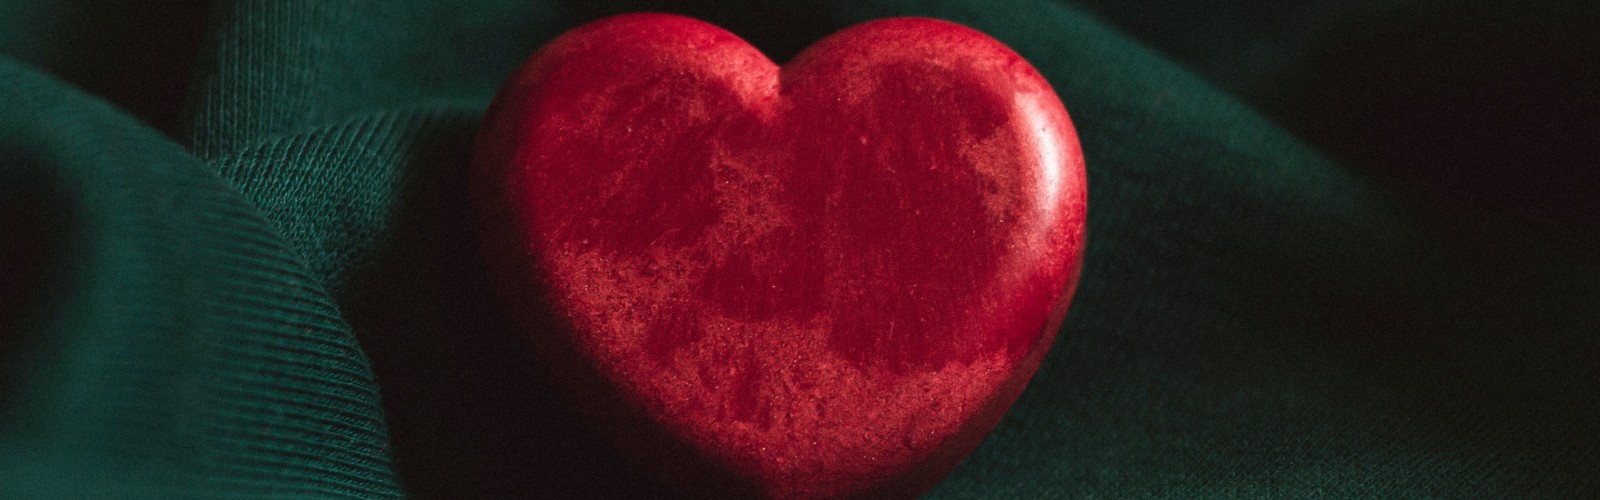 Photograph of a red stone heart on a green background